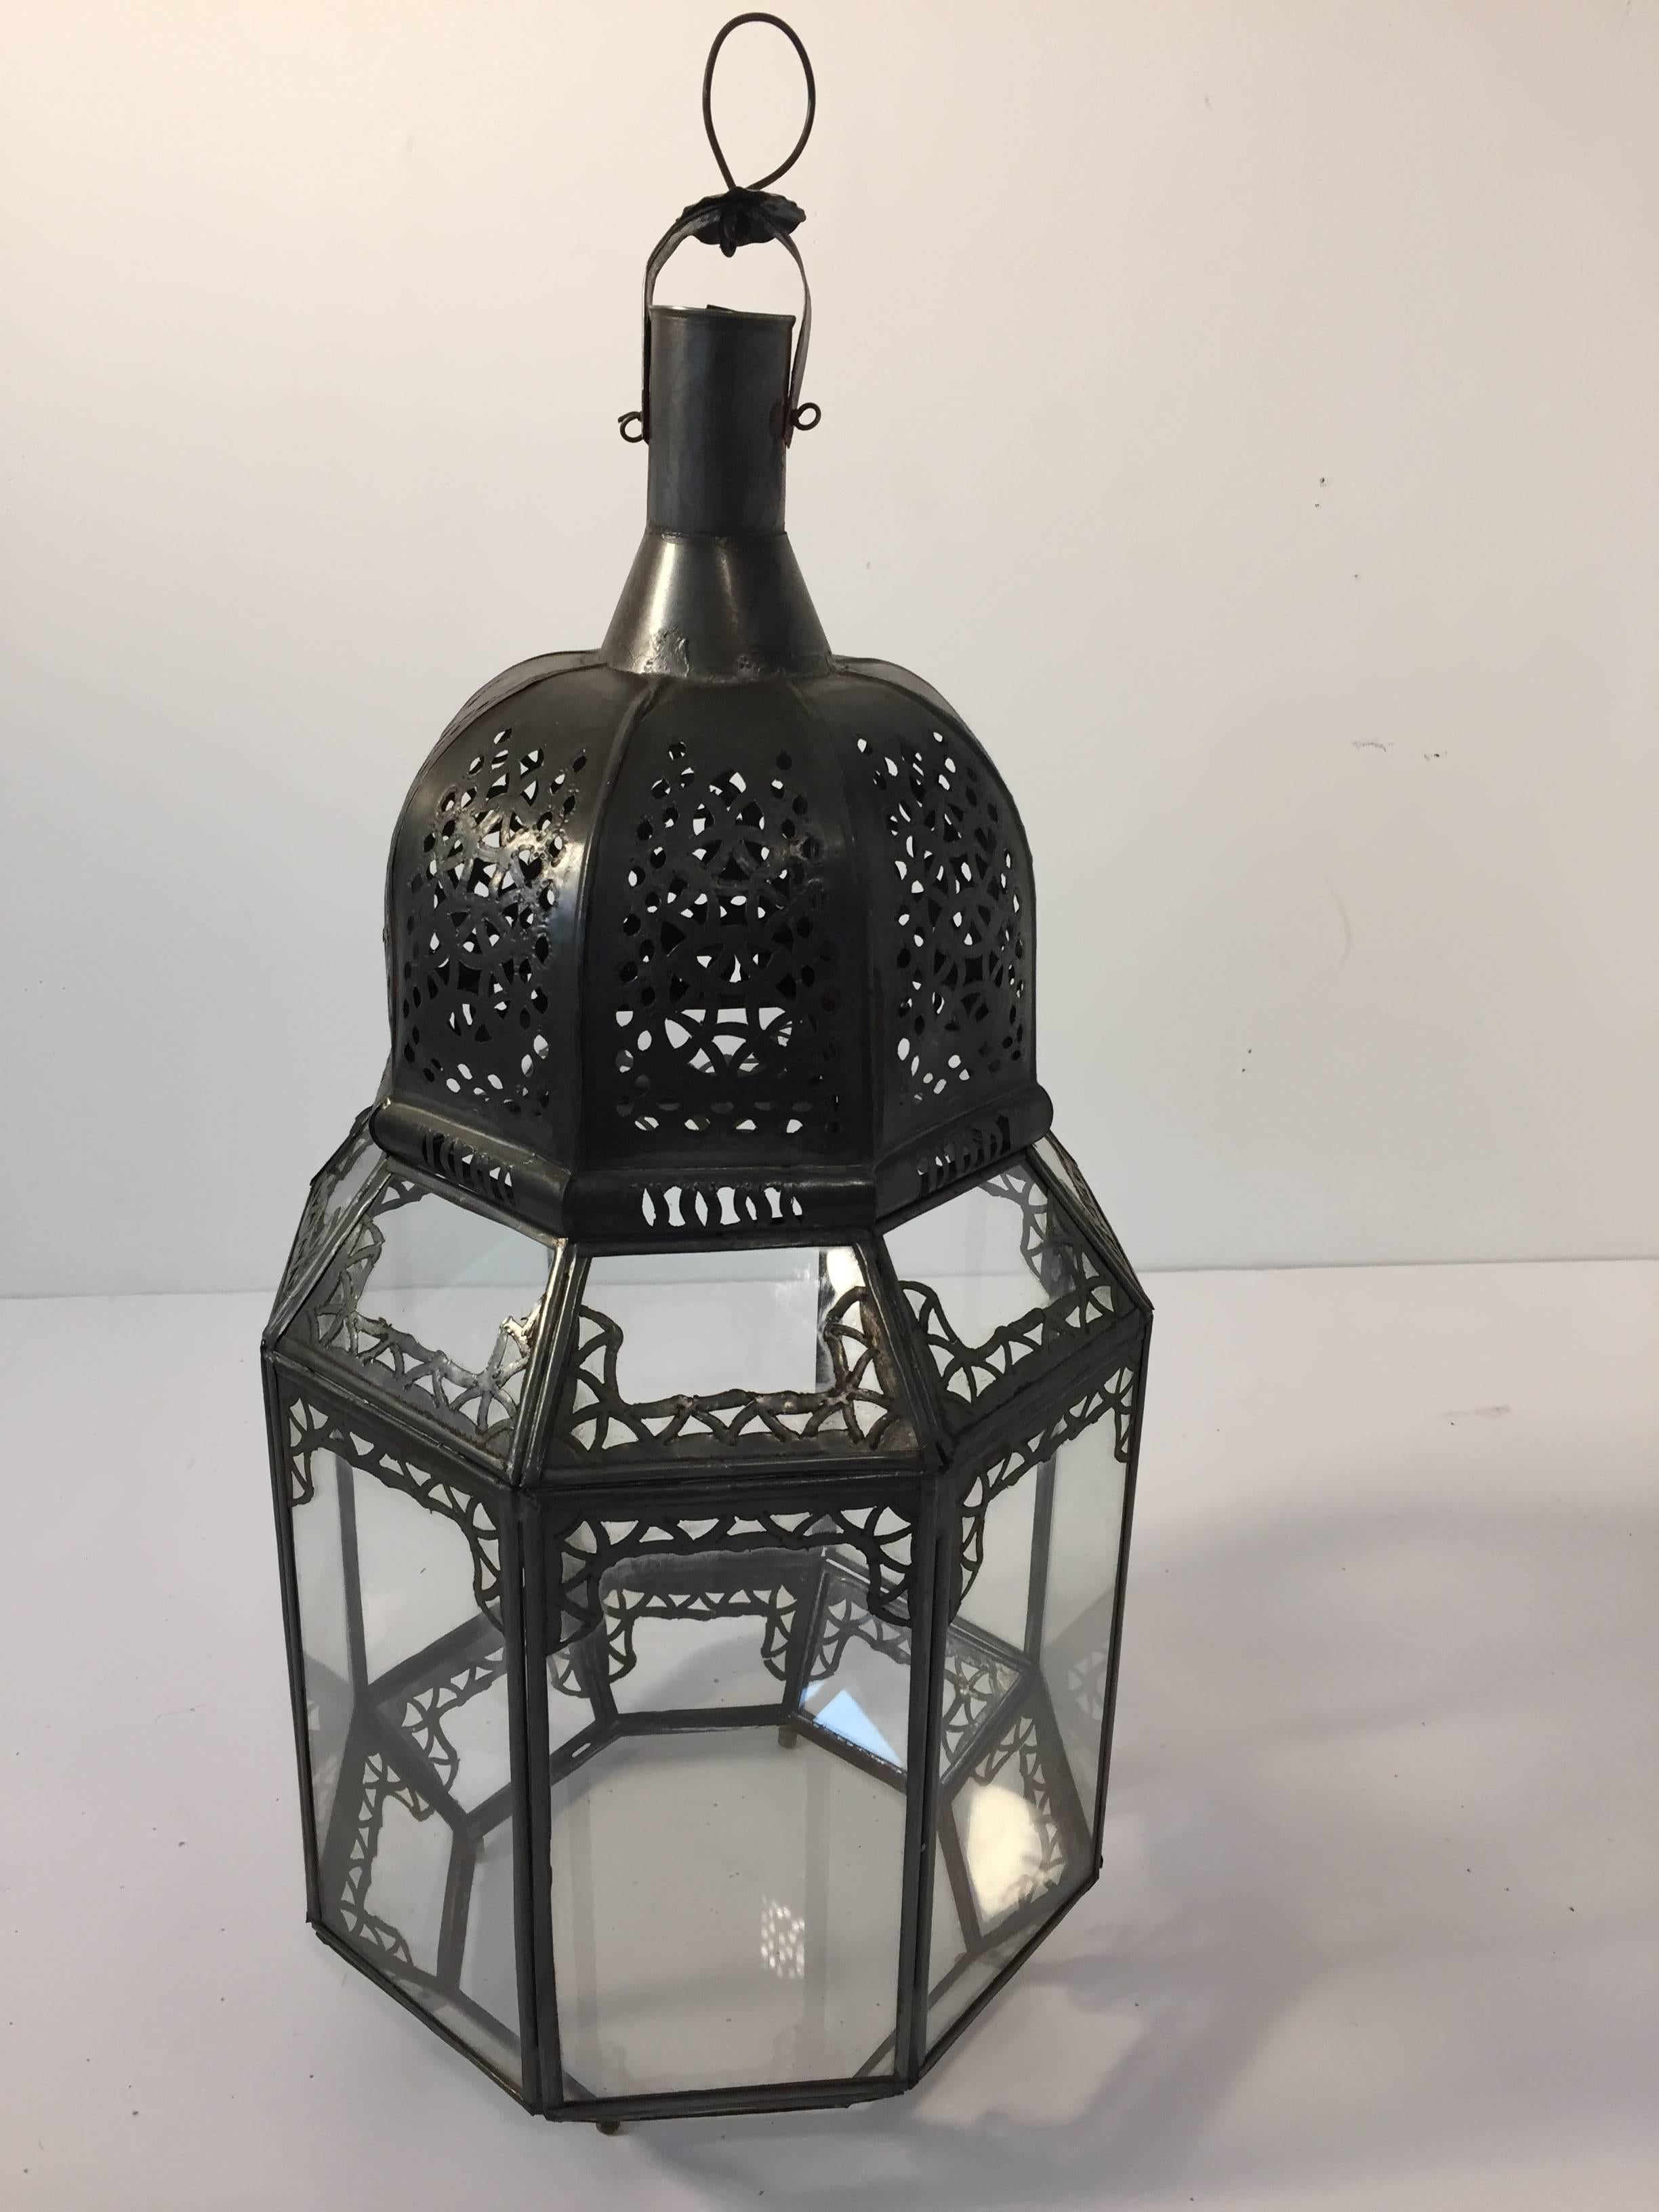 Vintage Moroccan Moorish clear glass lantern with intricate metal filigree.
Octagonal shape, delicately handcrafted by artisans in Morocco.
Bronze metal color finish.
Could be used with candle or rewired for electricity as a Moroccan pendant or wall